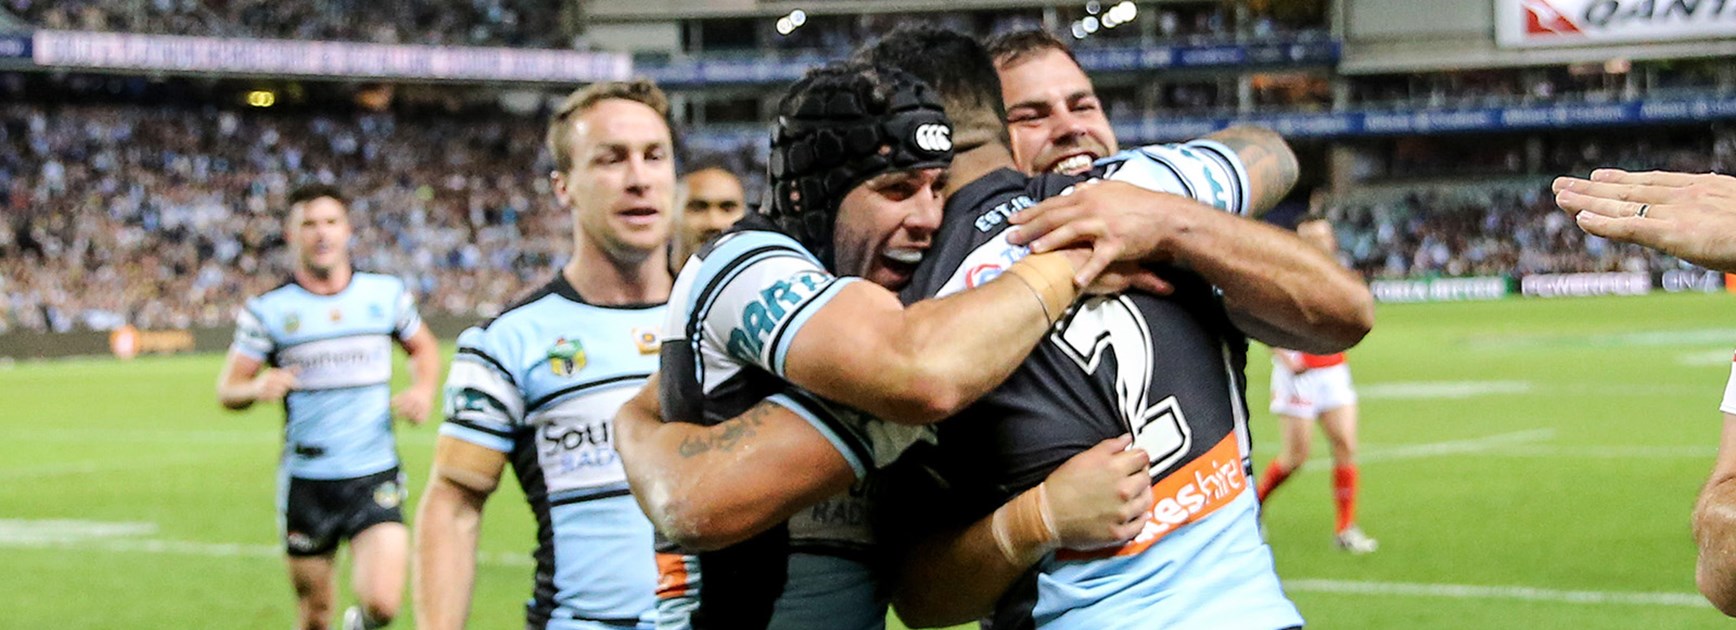 The sharks celebrate the first try of the preliminary final against the Cowboys at Allianz Stadium.